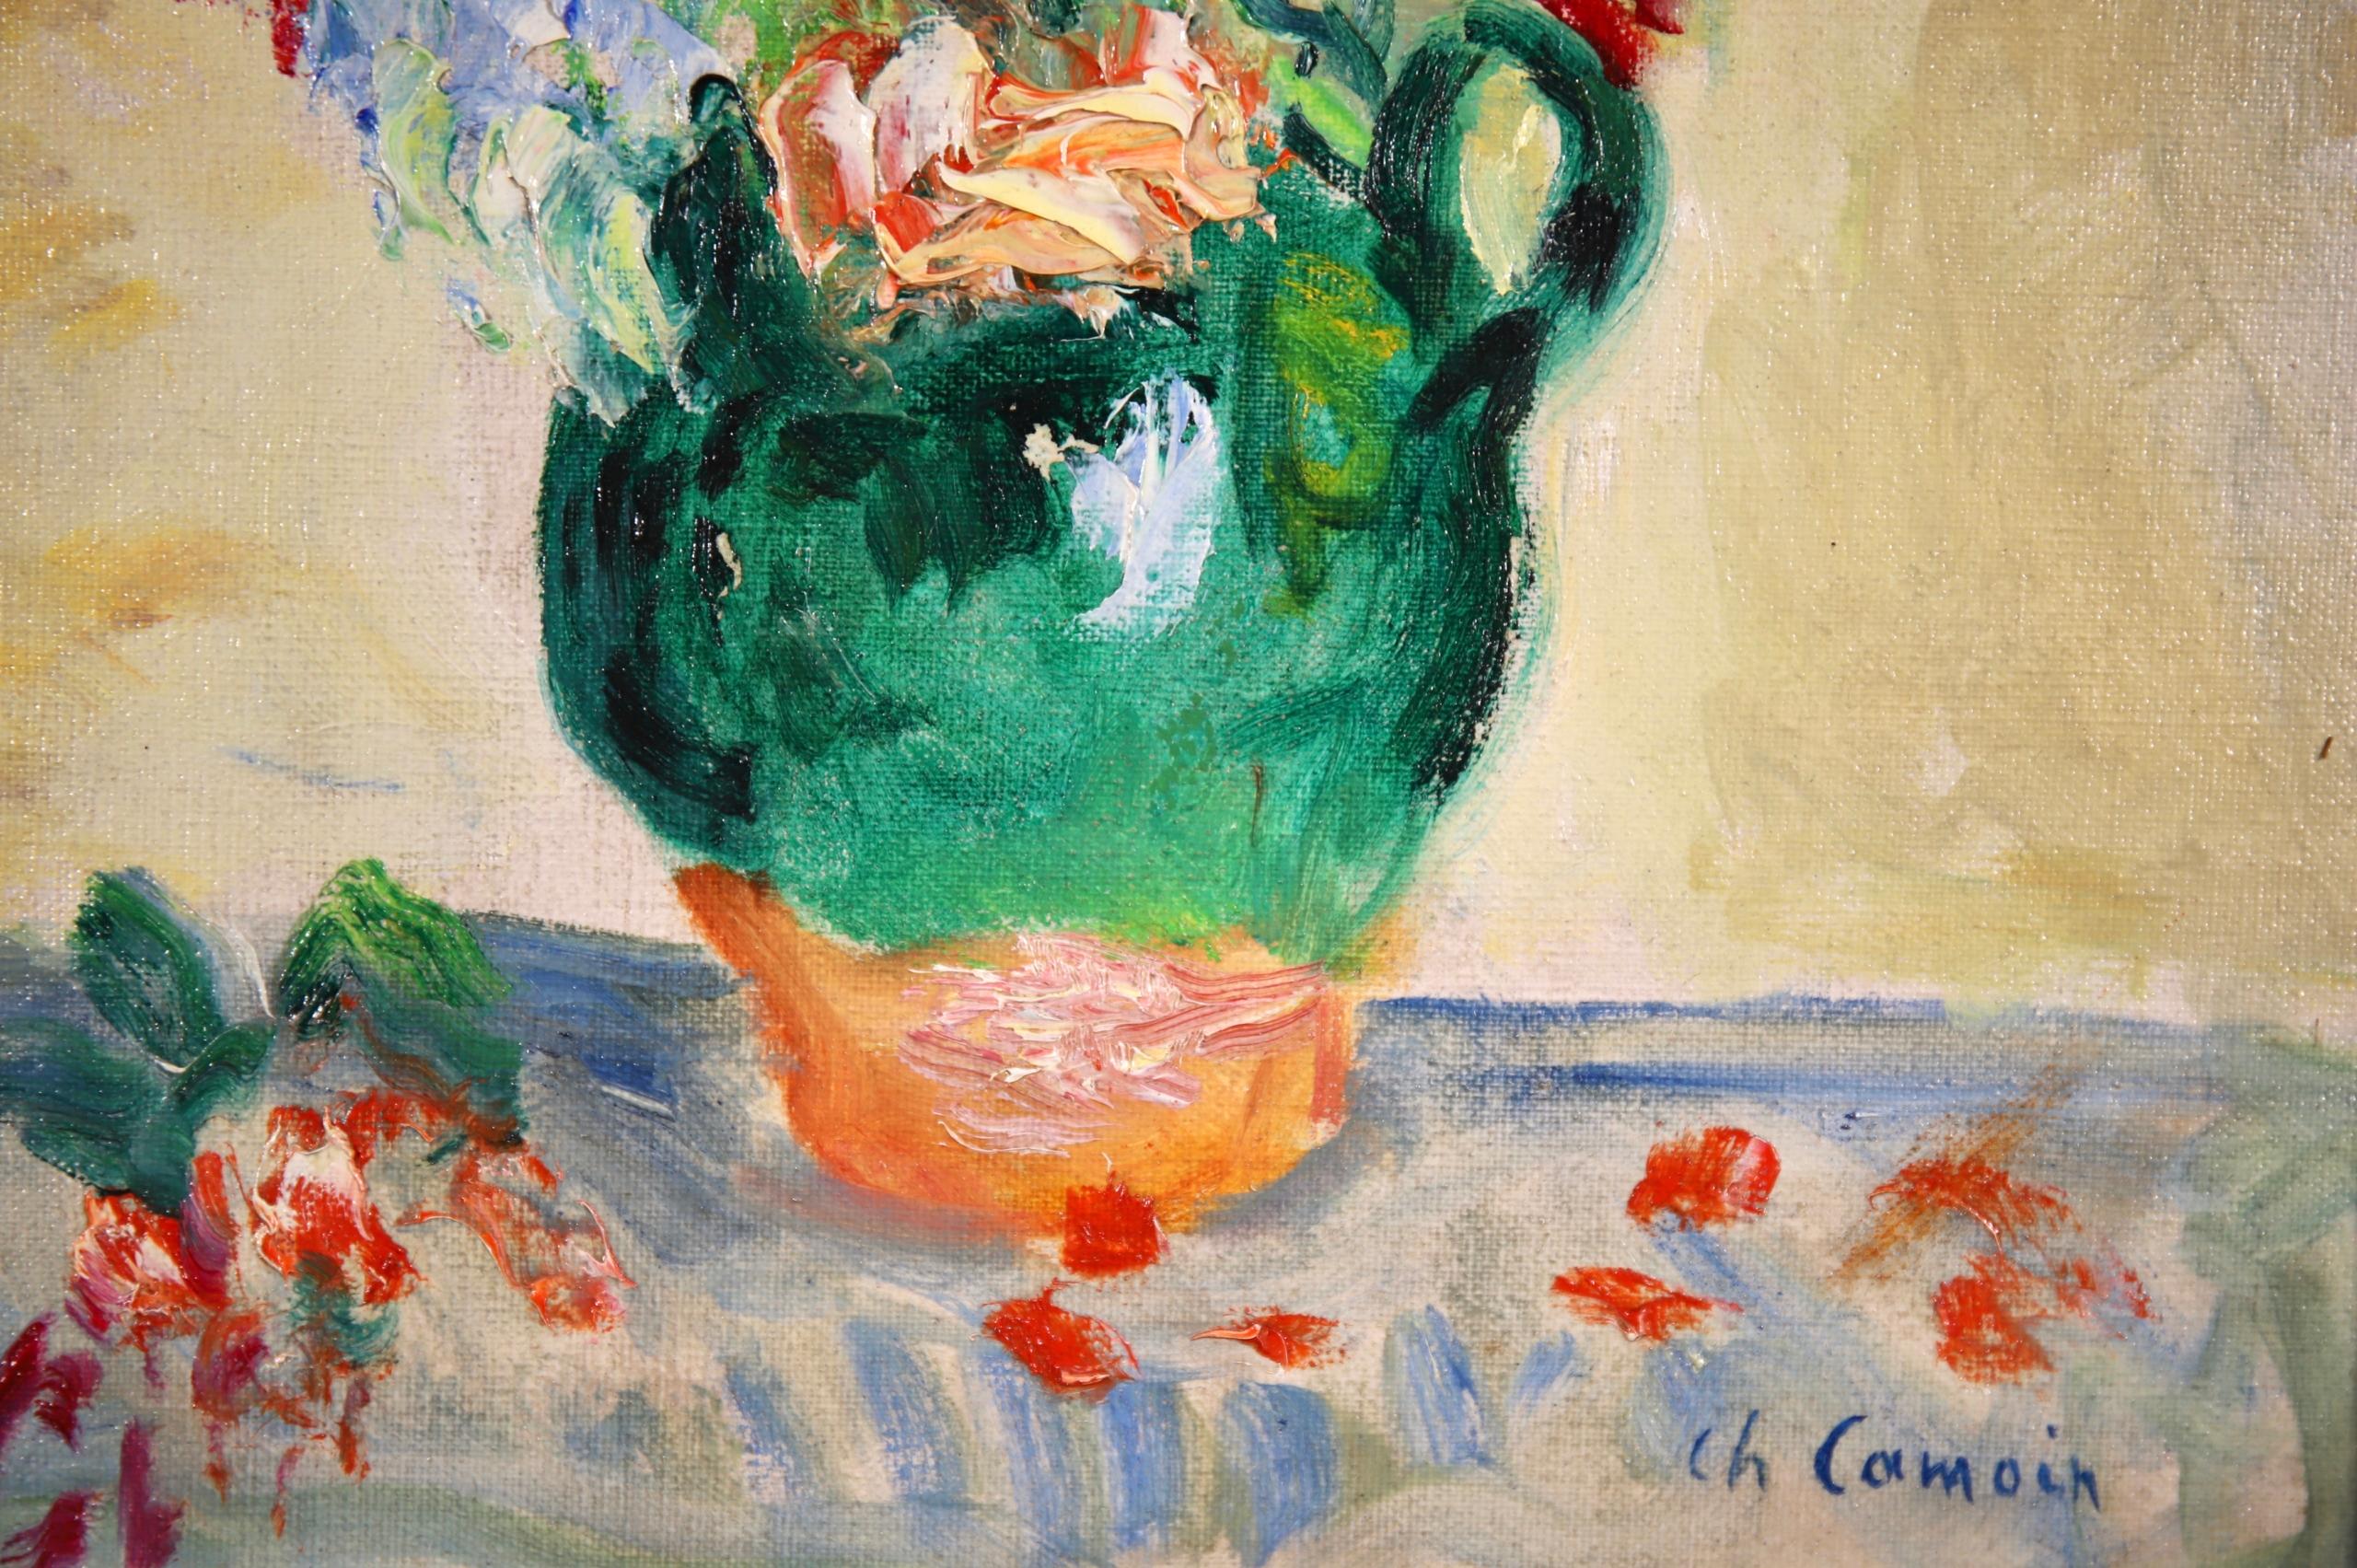 A beautiful oil on board circa 1920 by French expressionist and fauvist painter Charles Camoin. The work depicts a bright bouquet of flowers in reds, yellows, blues and whites in a green ceramic jug. 

Signature:
Signed lower